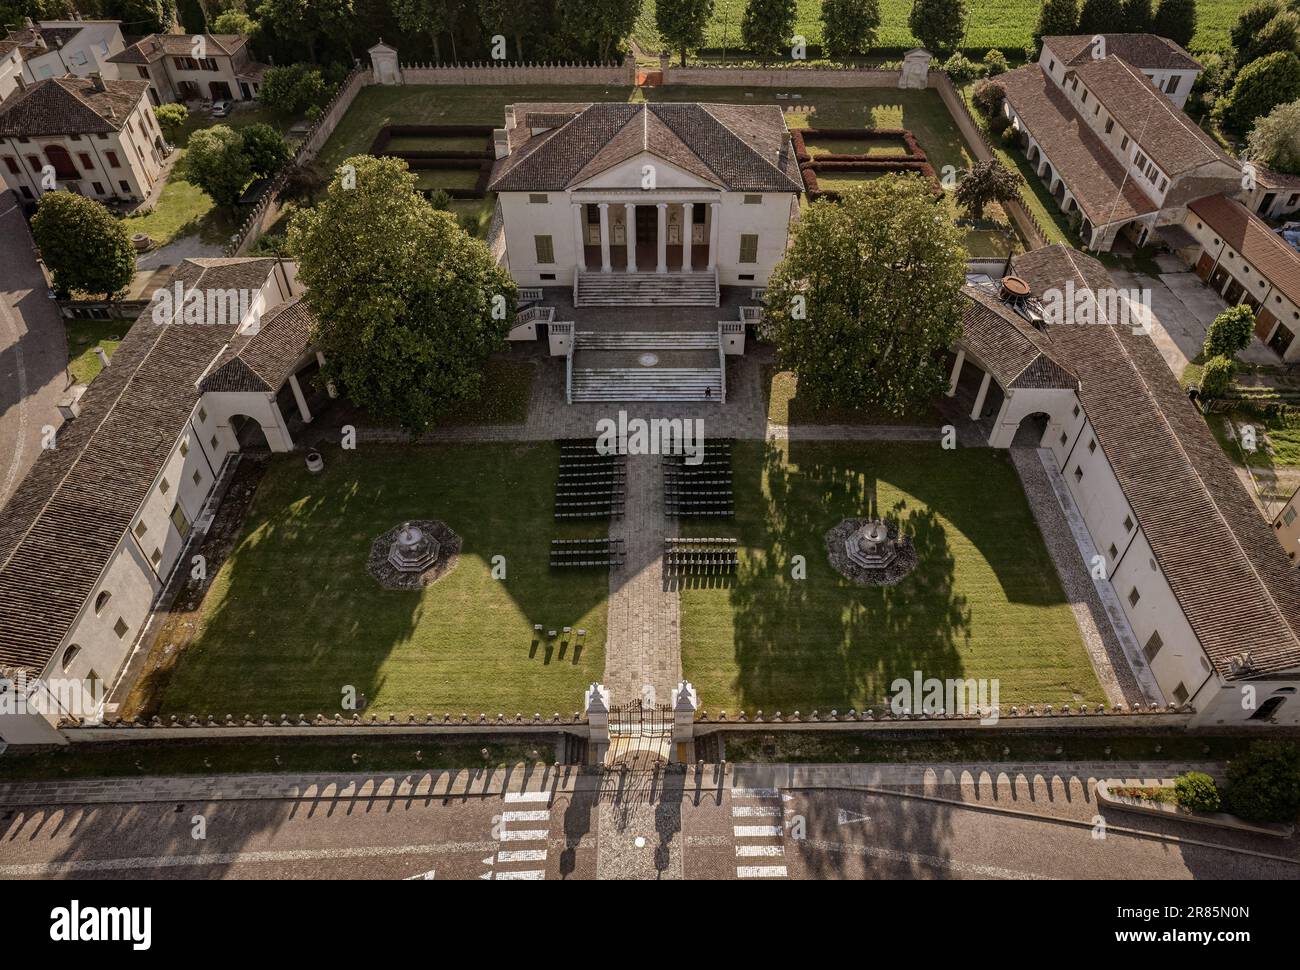 The magnificent Villa Badoer, an architectural gem located in Fratta Polesine, Italy. Stock Photo